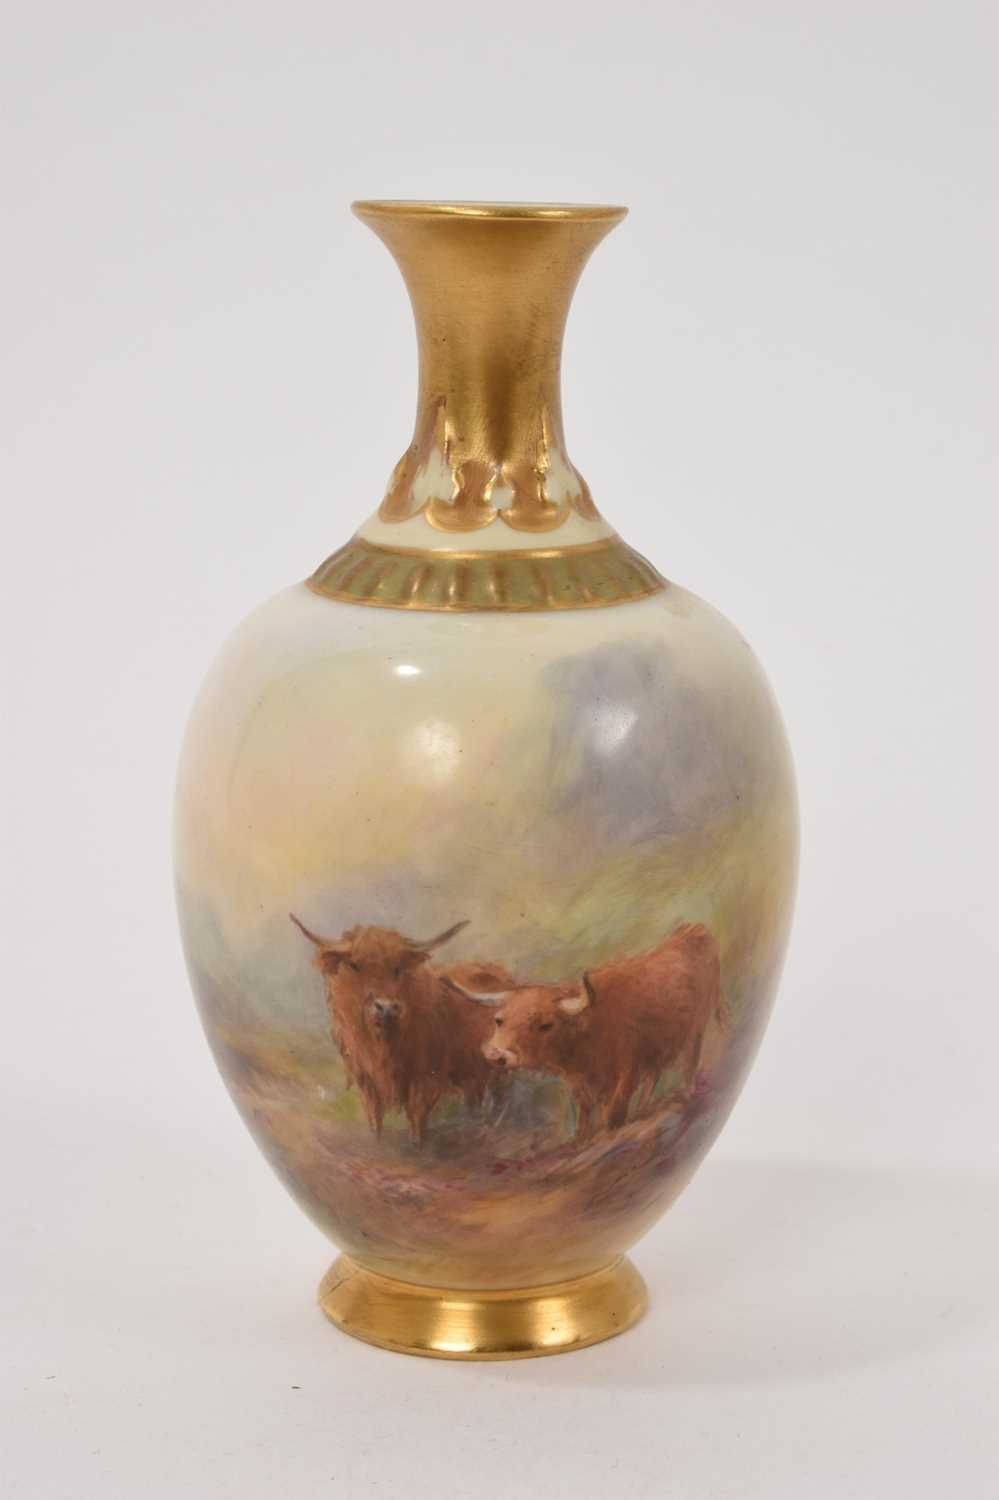 Miniature Royal Worcester vase decorated with highland cattle by James Stinton